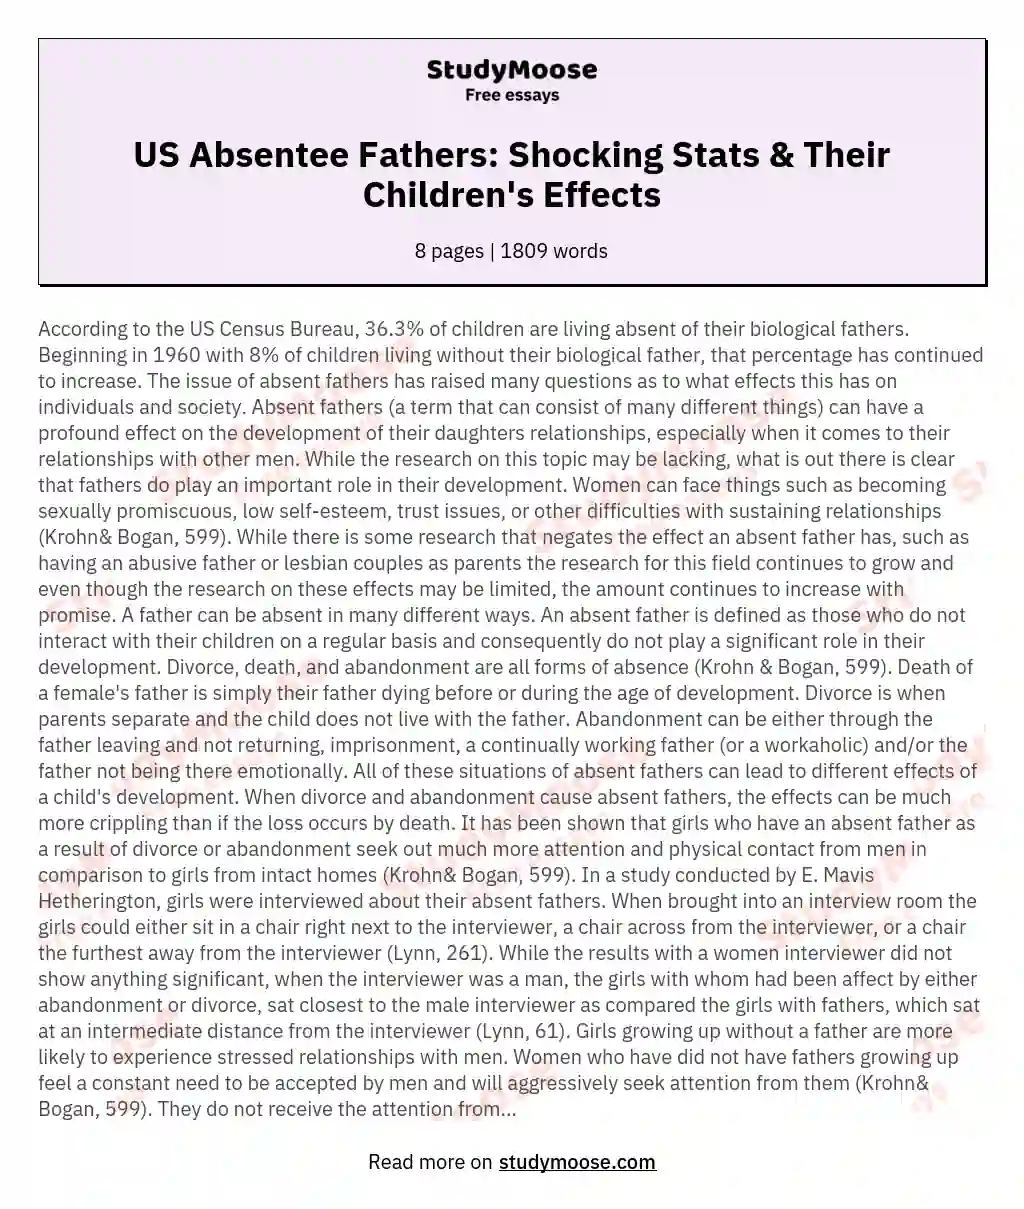 US Absentee Fathers: Shocking Stats & Their Children's Effects essay